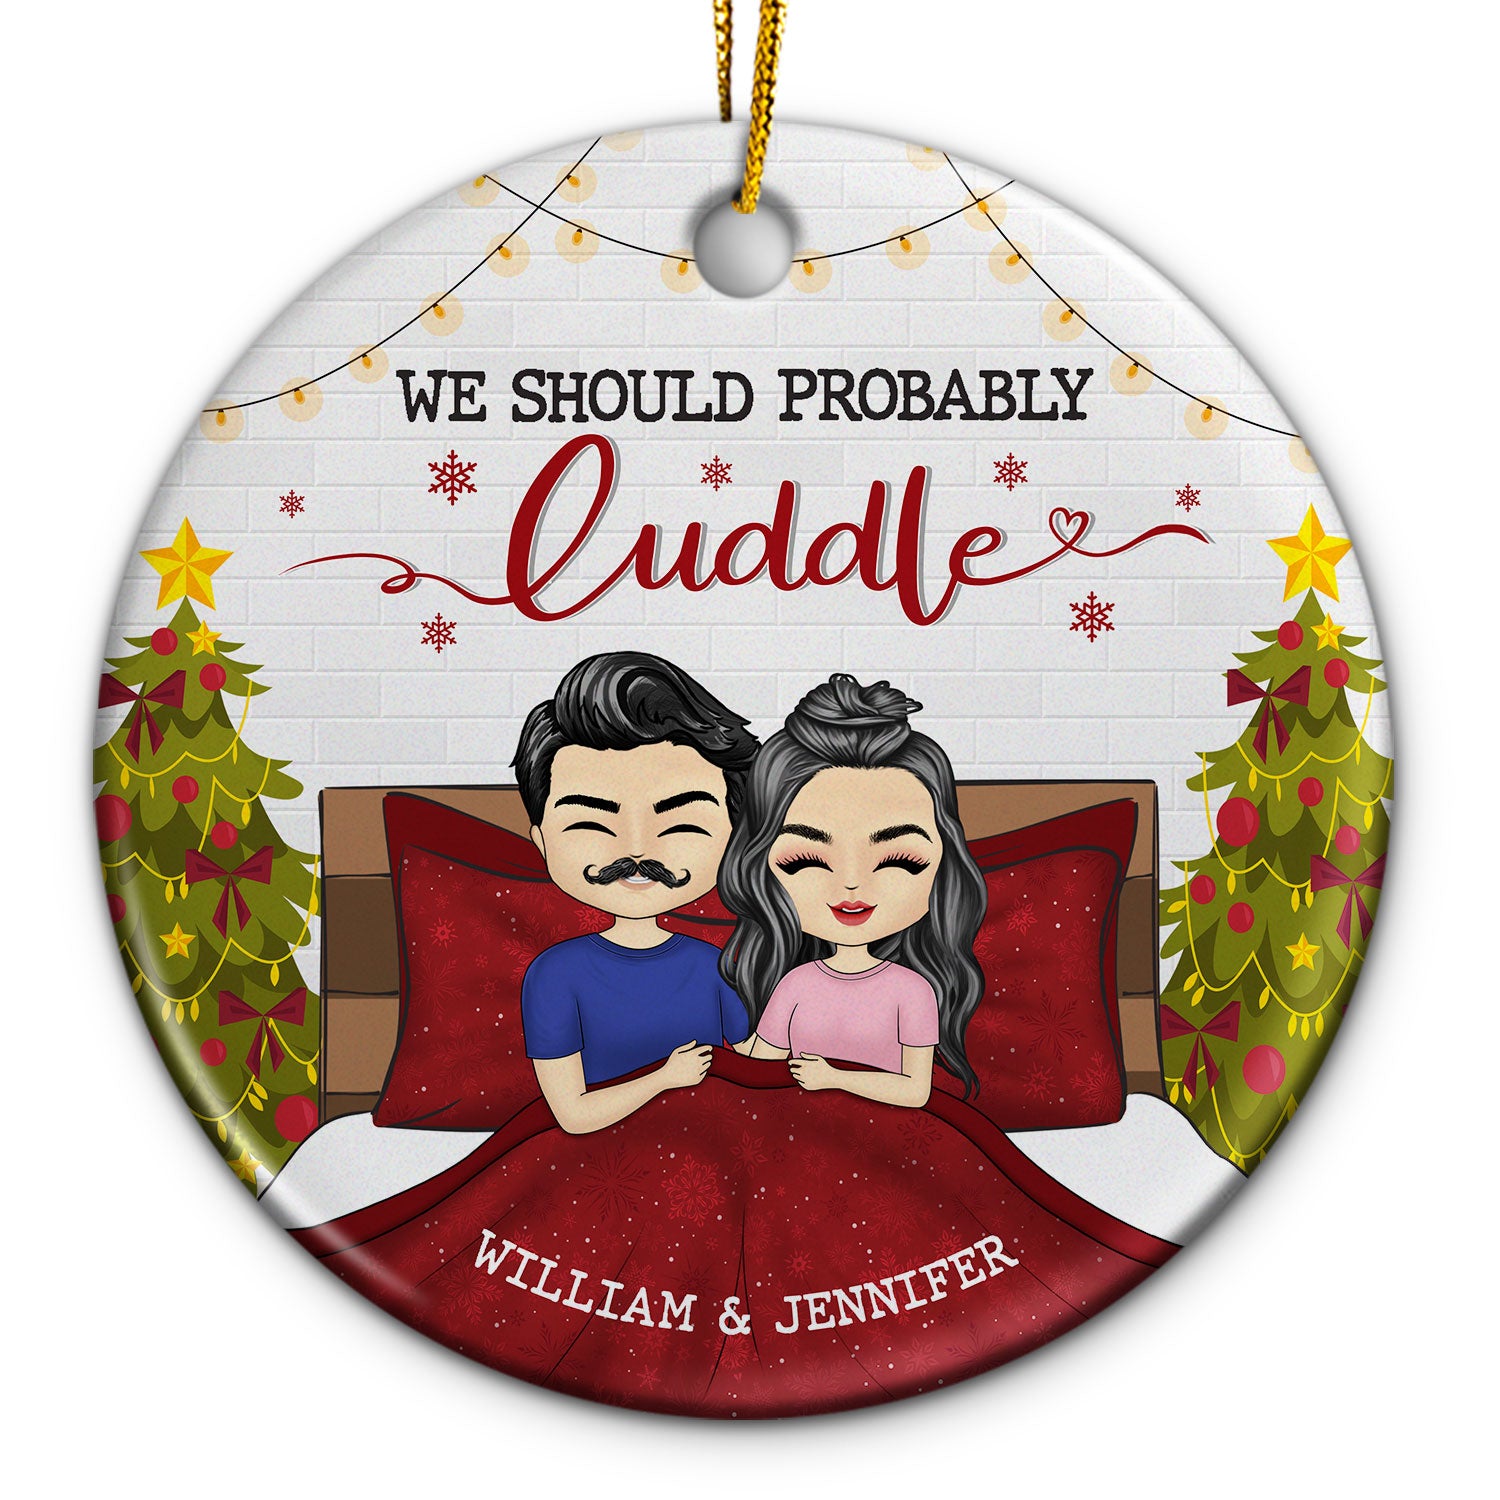 We Should Probably Cuddle - Christmas Gift For Couple - Personalized Custom Circle Ceramic Ornament